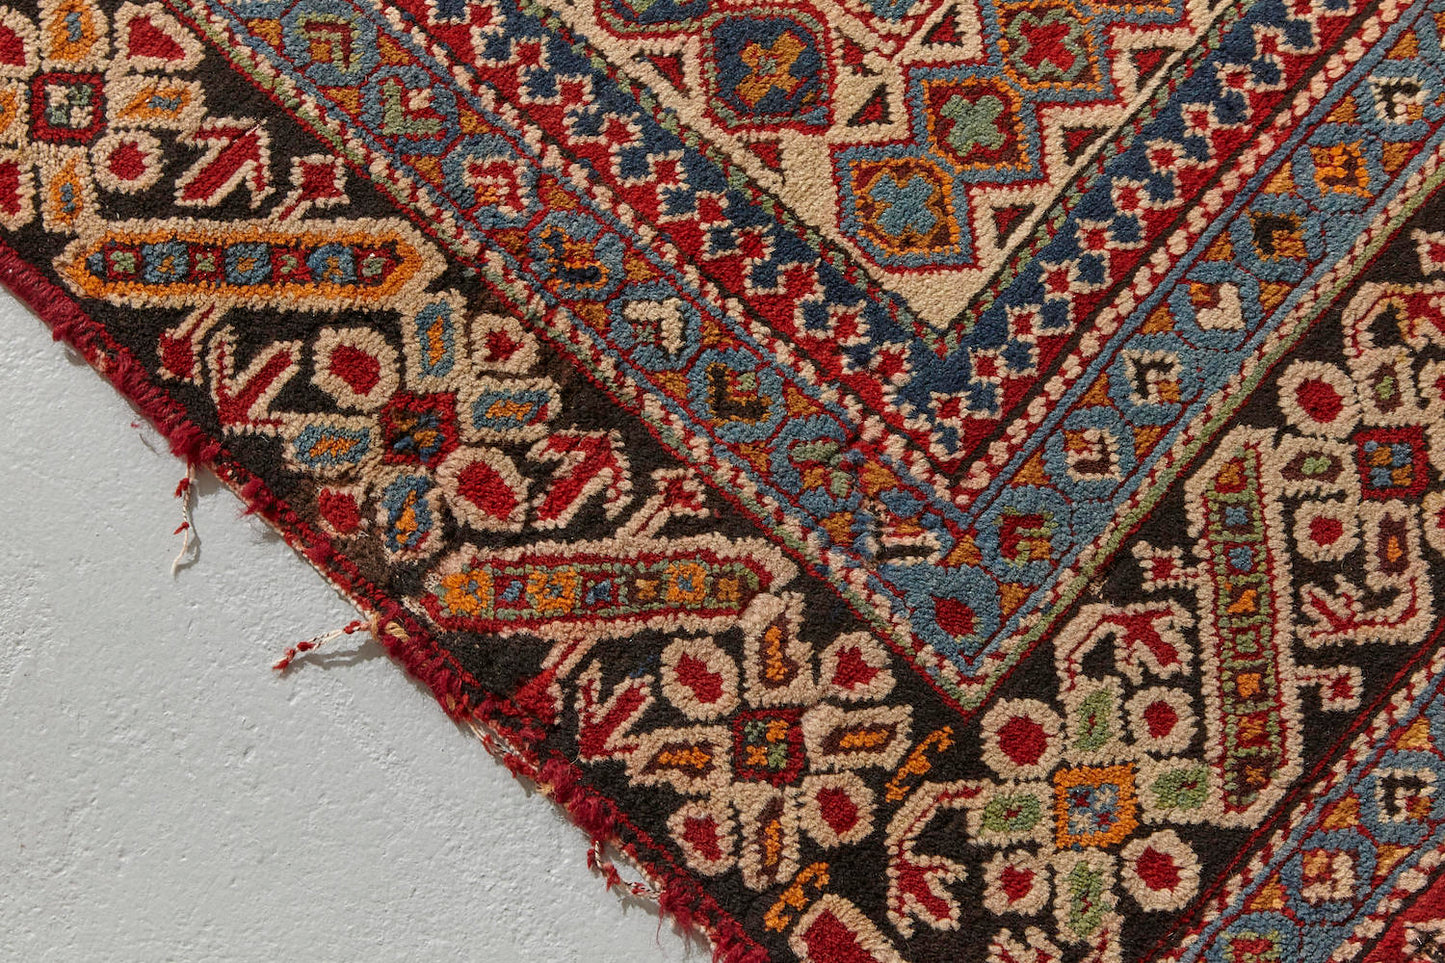 Chi chi antique Persian Rug runner with blue, red and cream designs intricately hand woven throughout, perfect for a hallway, living room or study - Available from King Kennedy Rugs Los Angeles